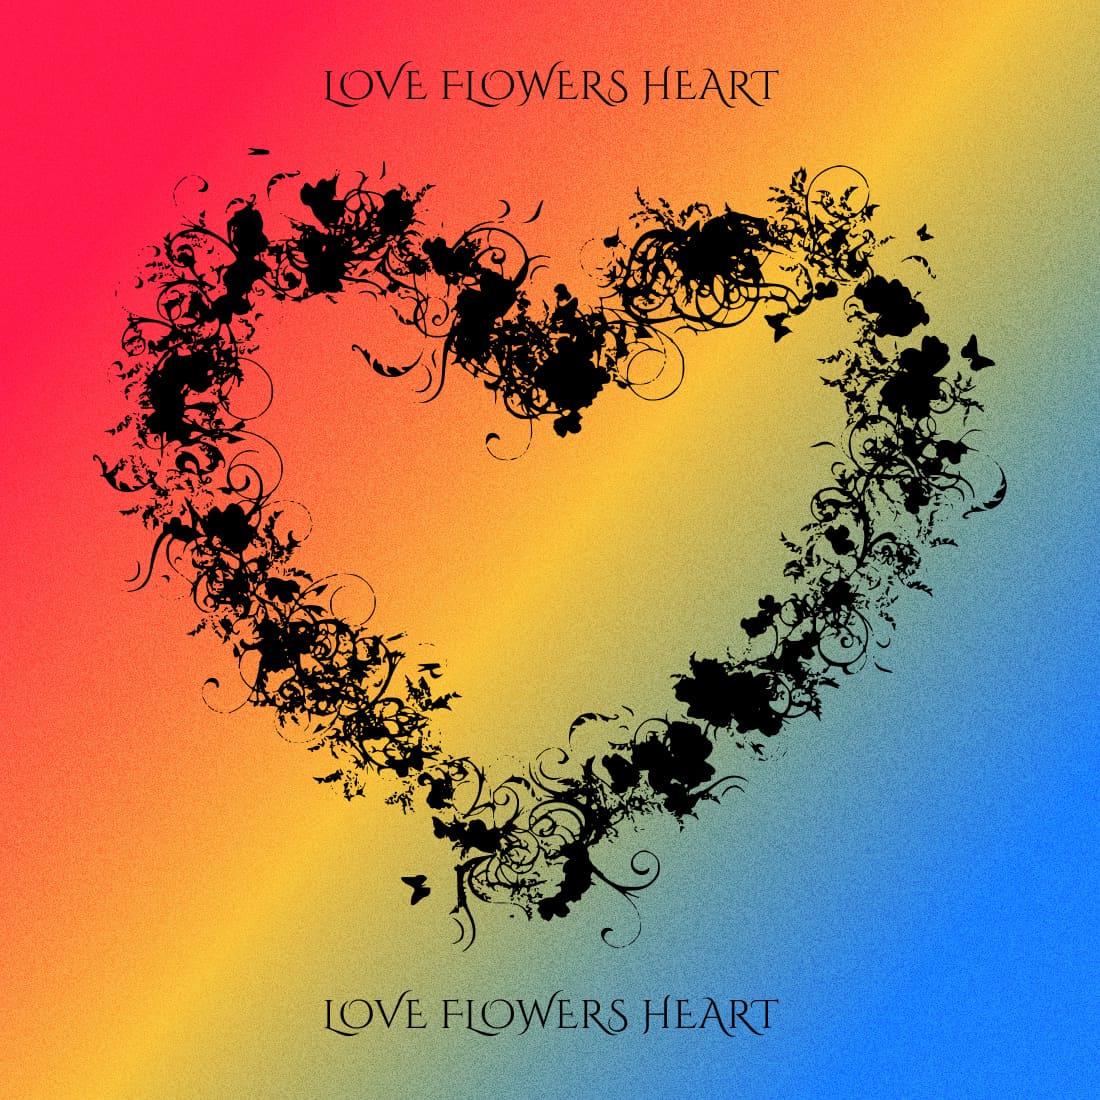 Love Flowers Heart - Colorful Image Example.